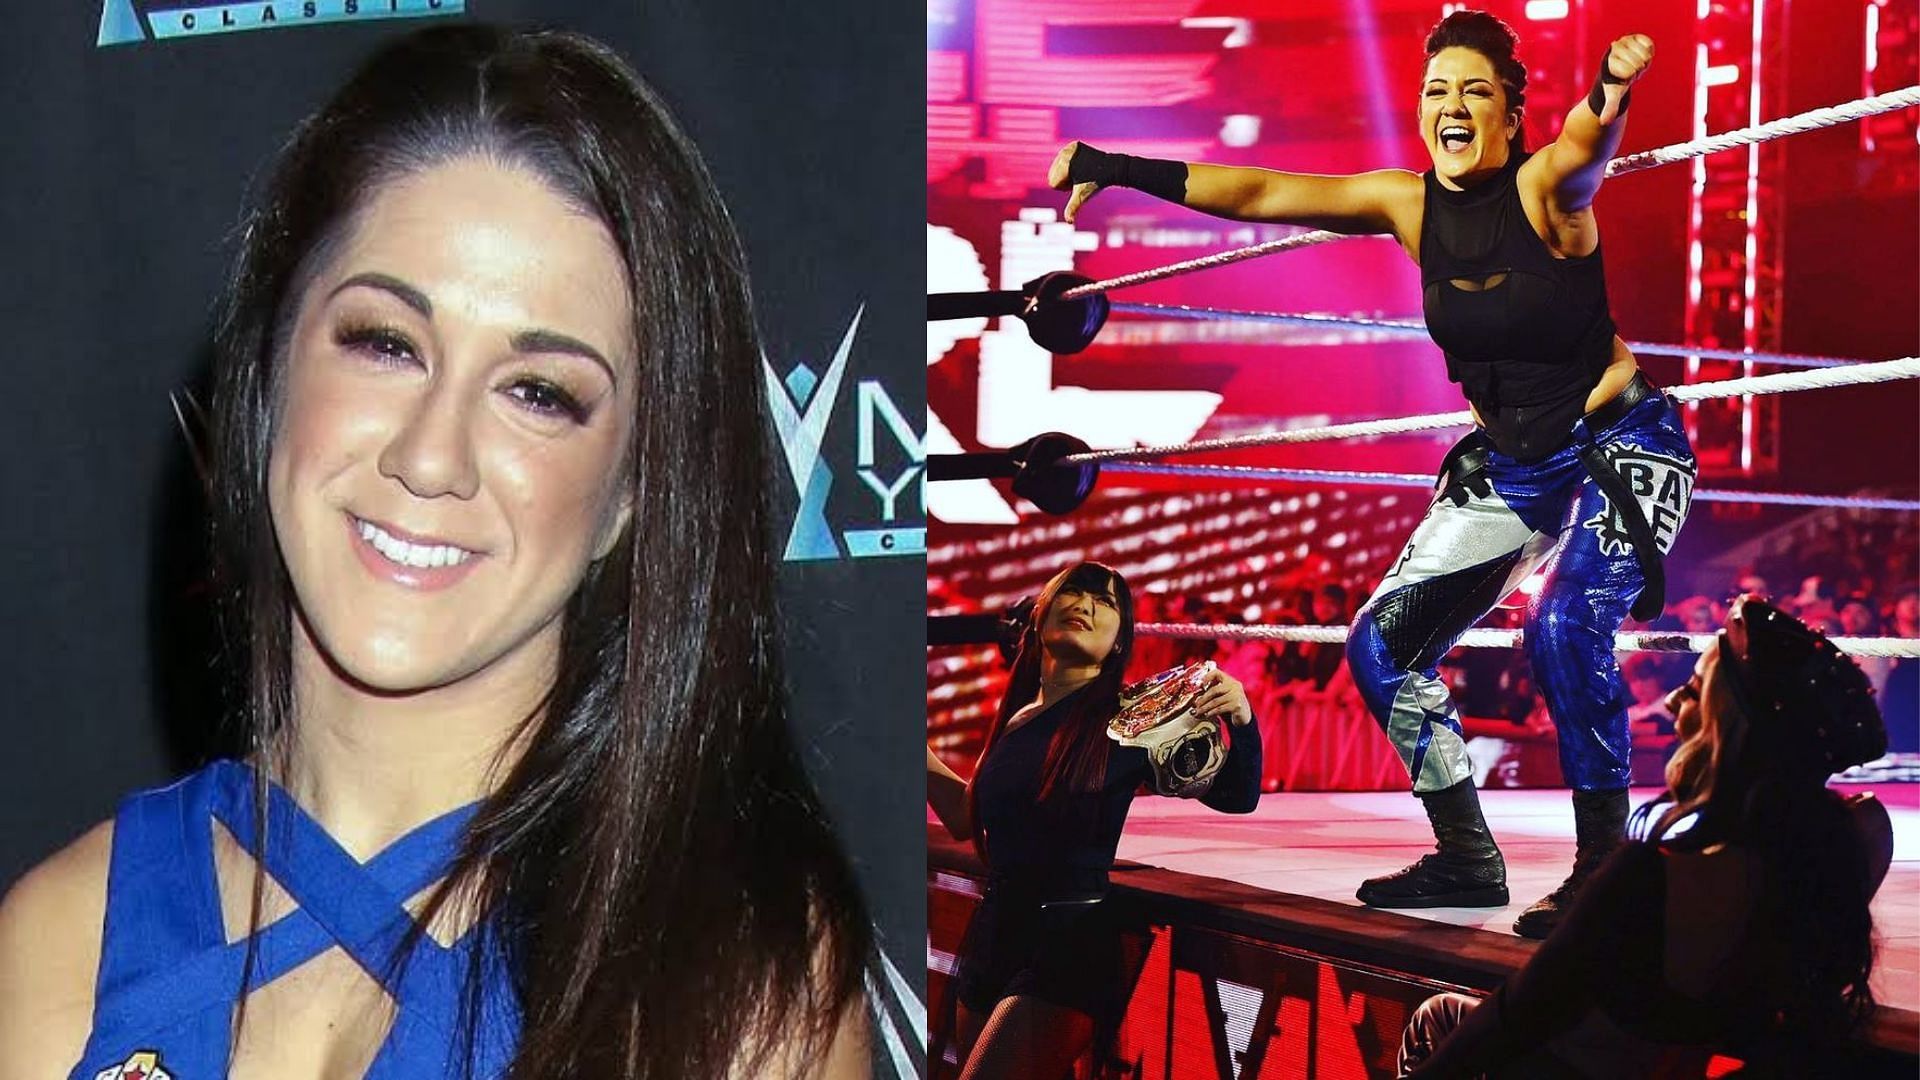 Bayley has been a prominent wrestler on WWE RAW